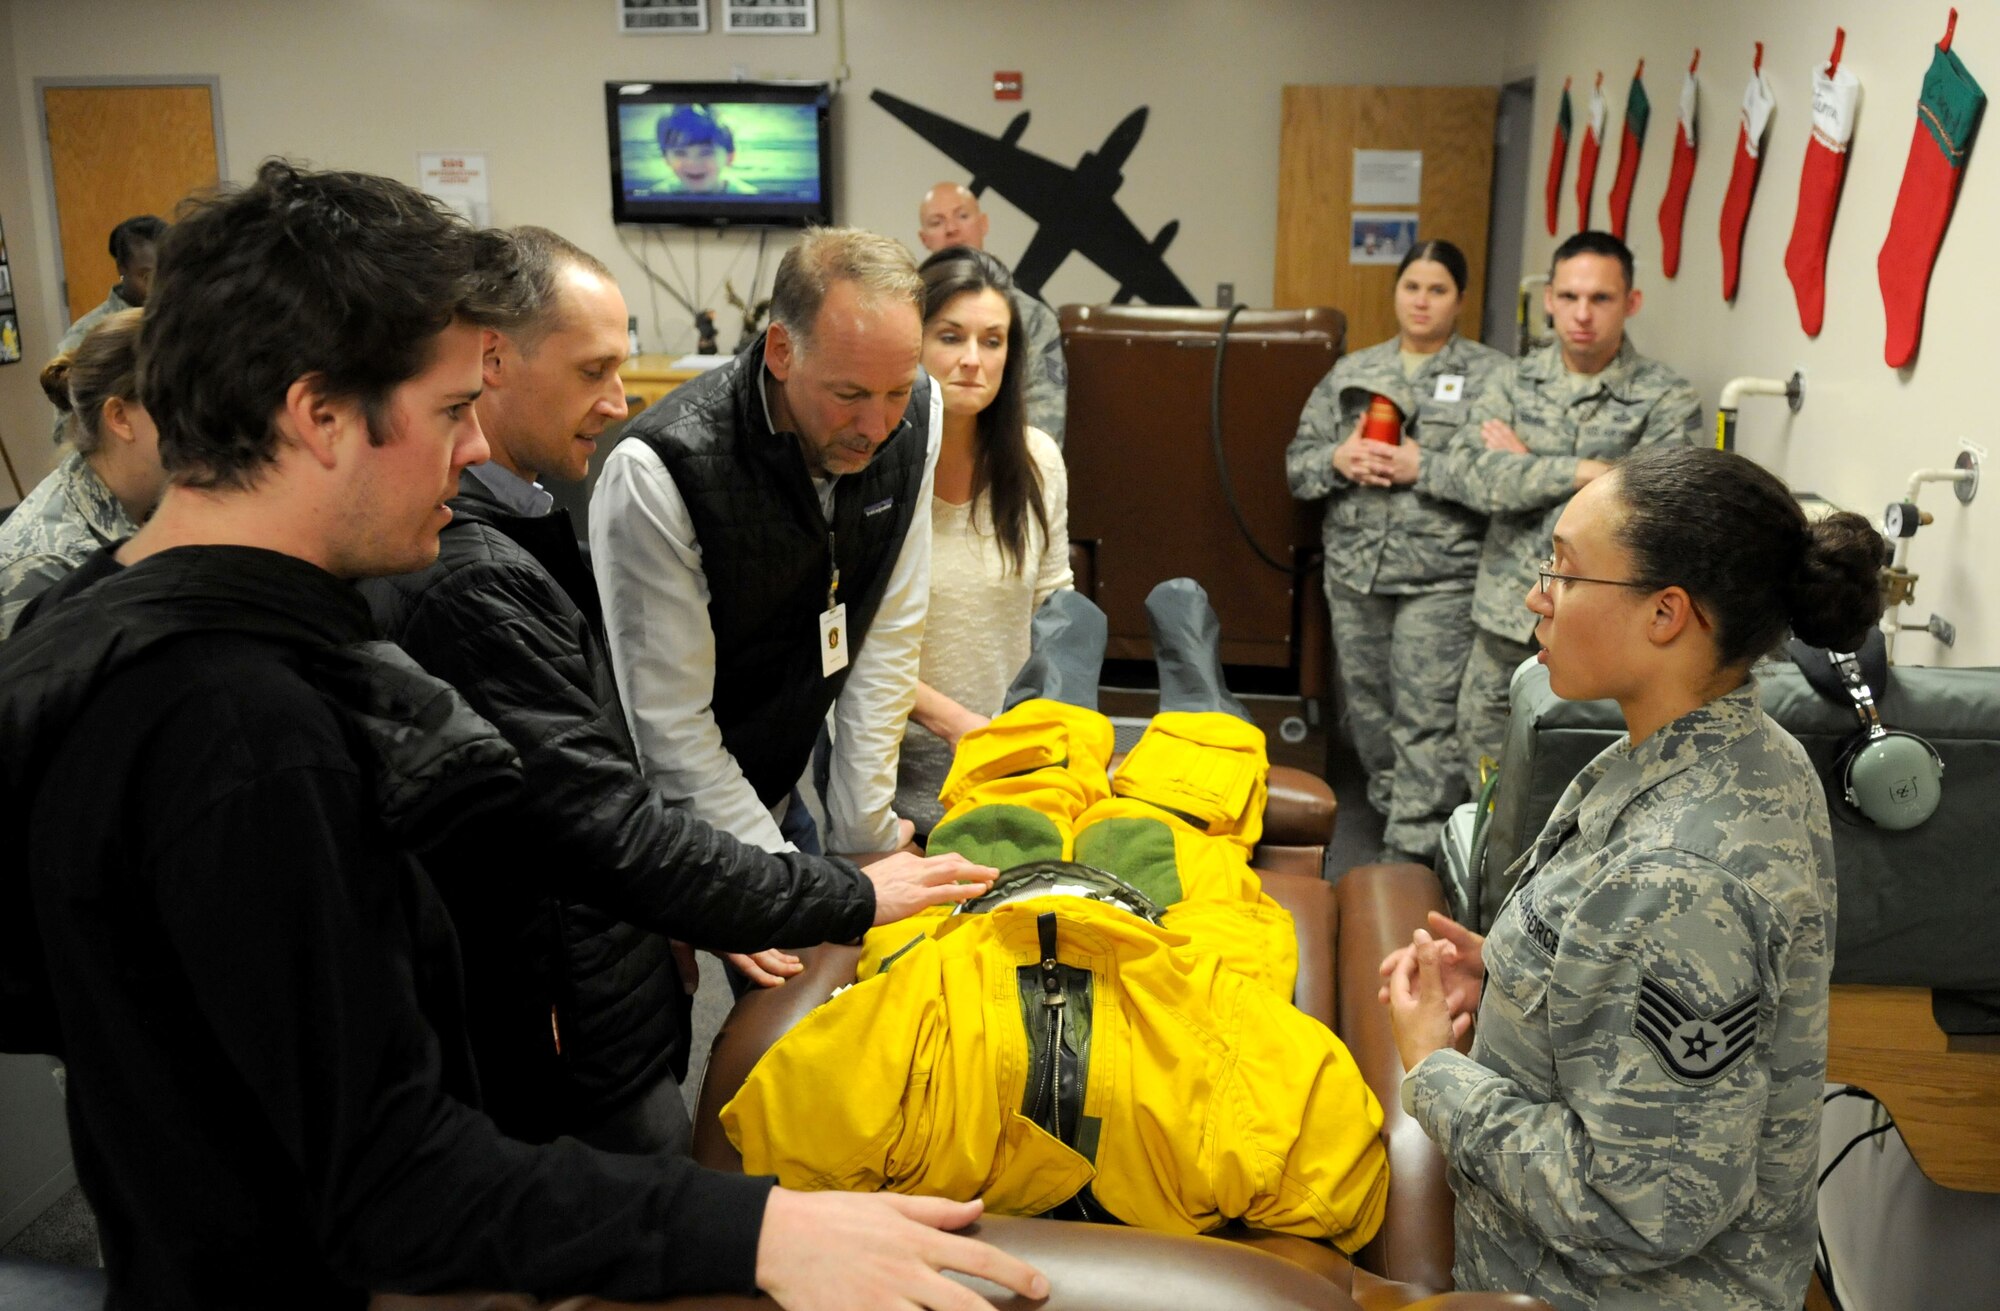 Members of Stanford University Design School learn about the U-2 Dragon Lady pilot suit as part of their visit for a design thinking seminar on the Inaugural Design Day